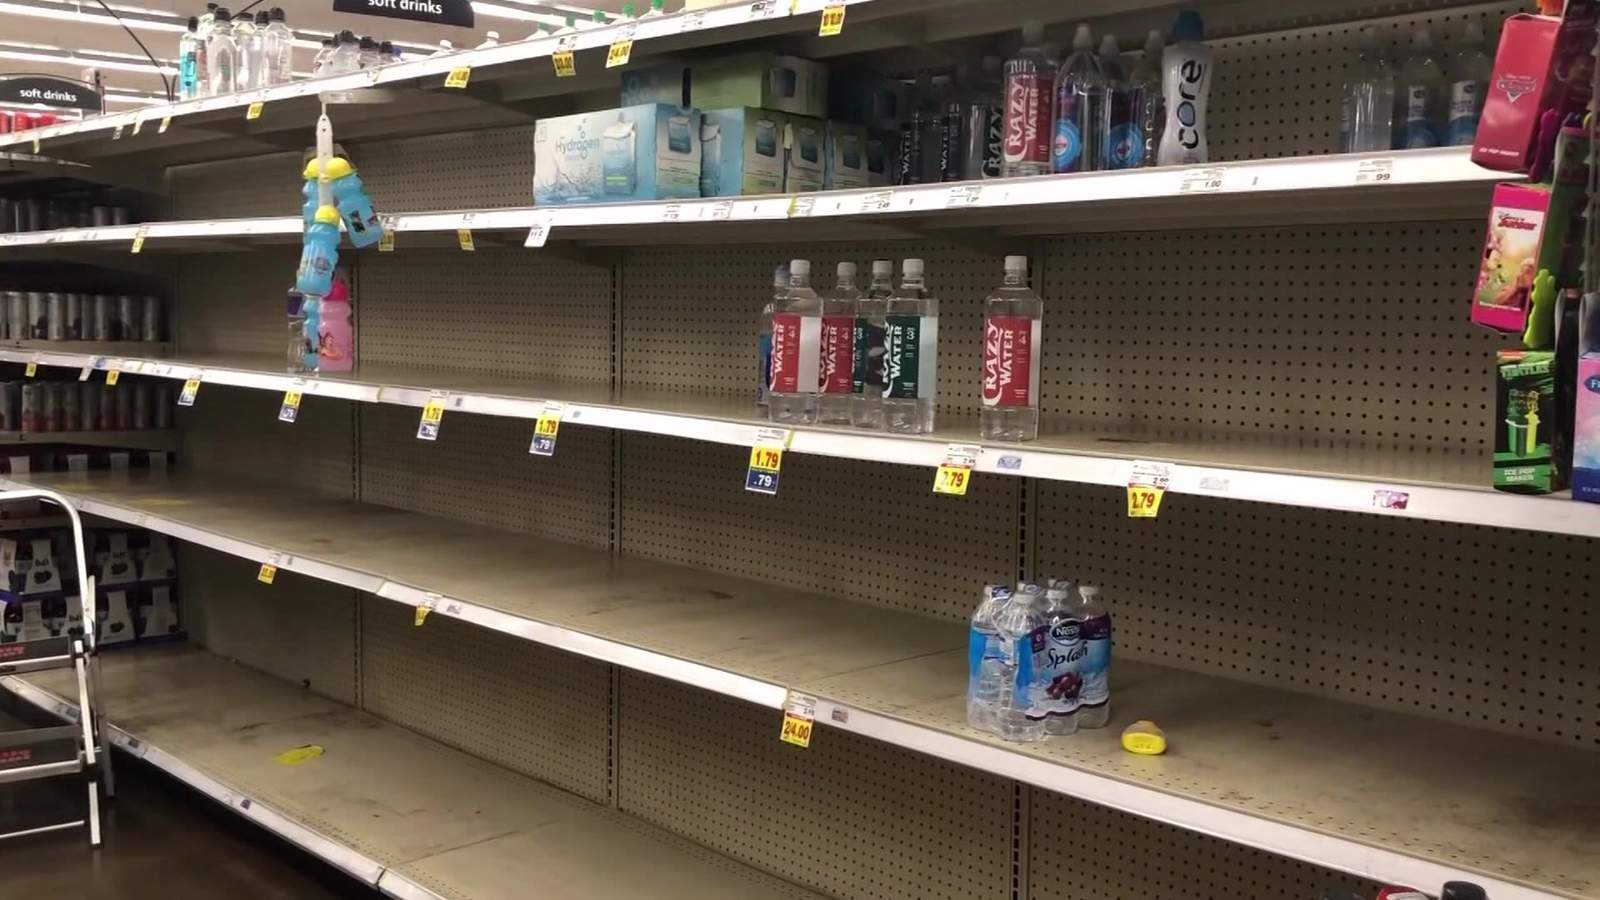 Bottled water selling out quickly in wake of boil water advisory across Houston